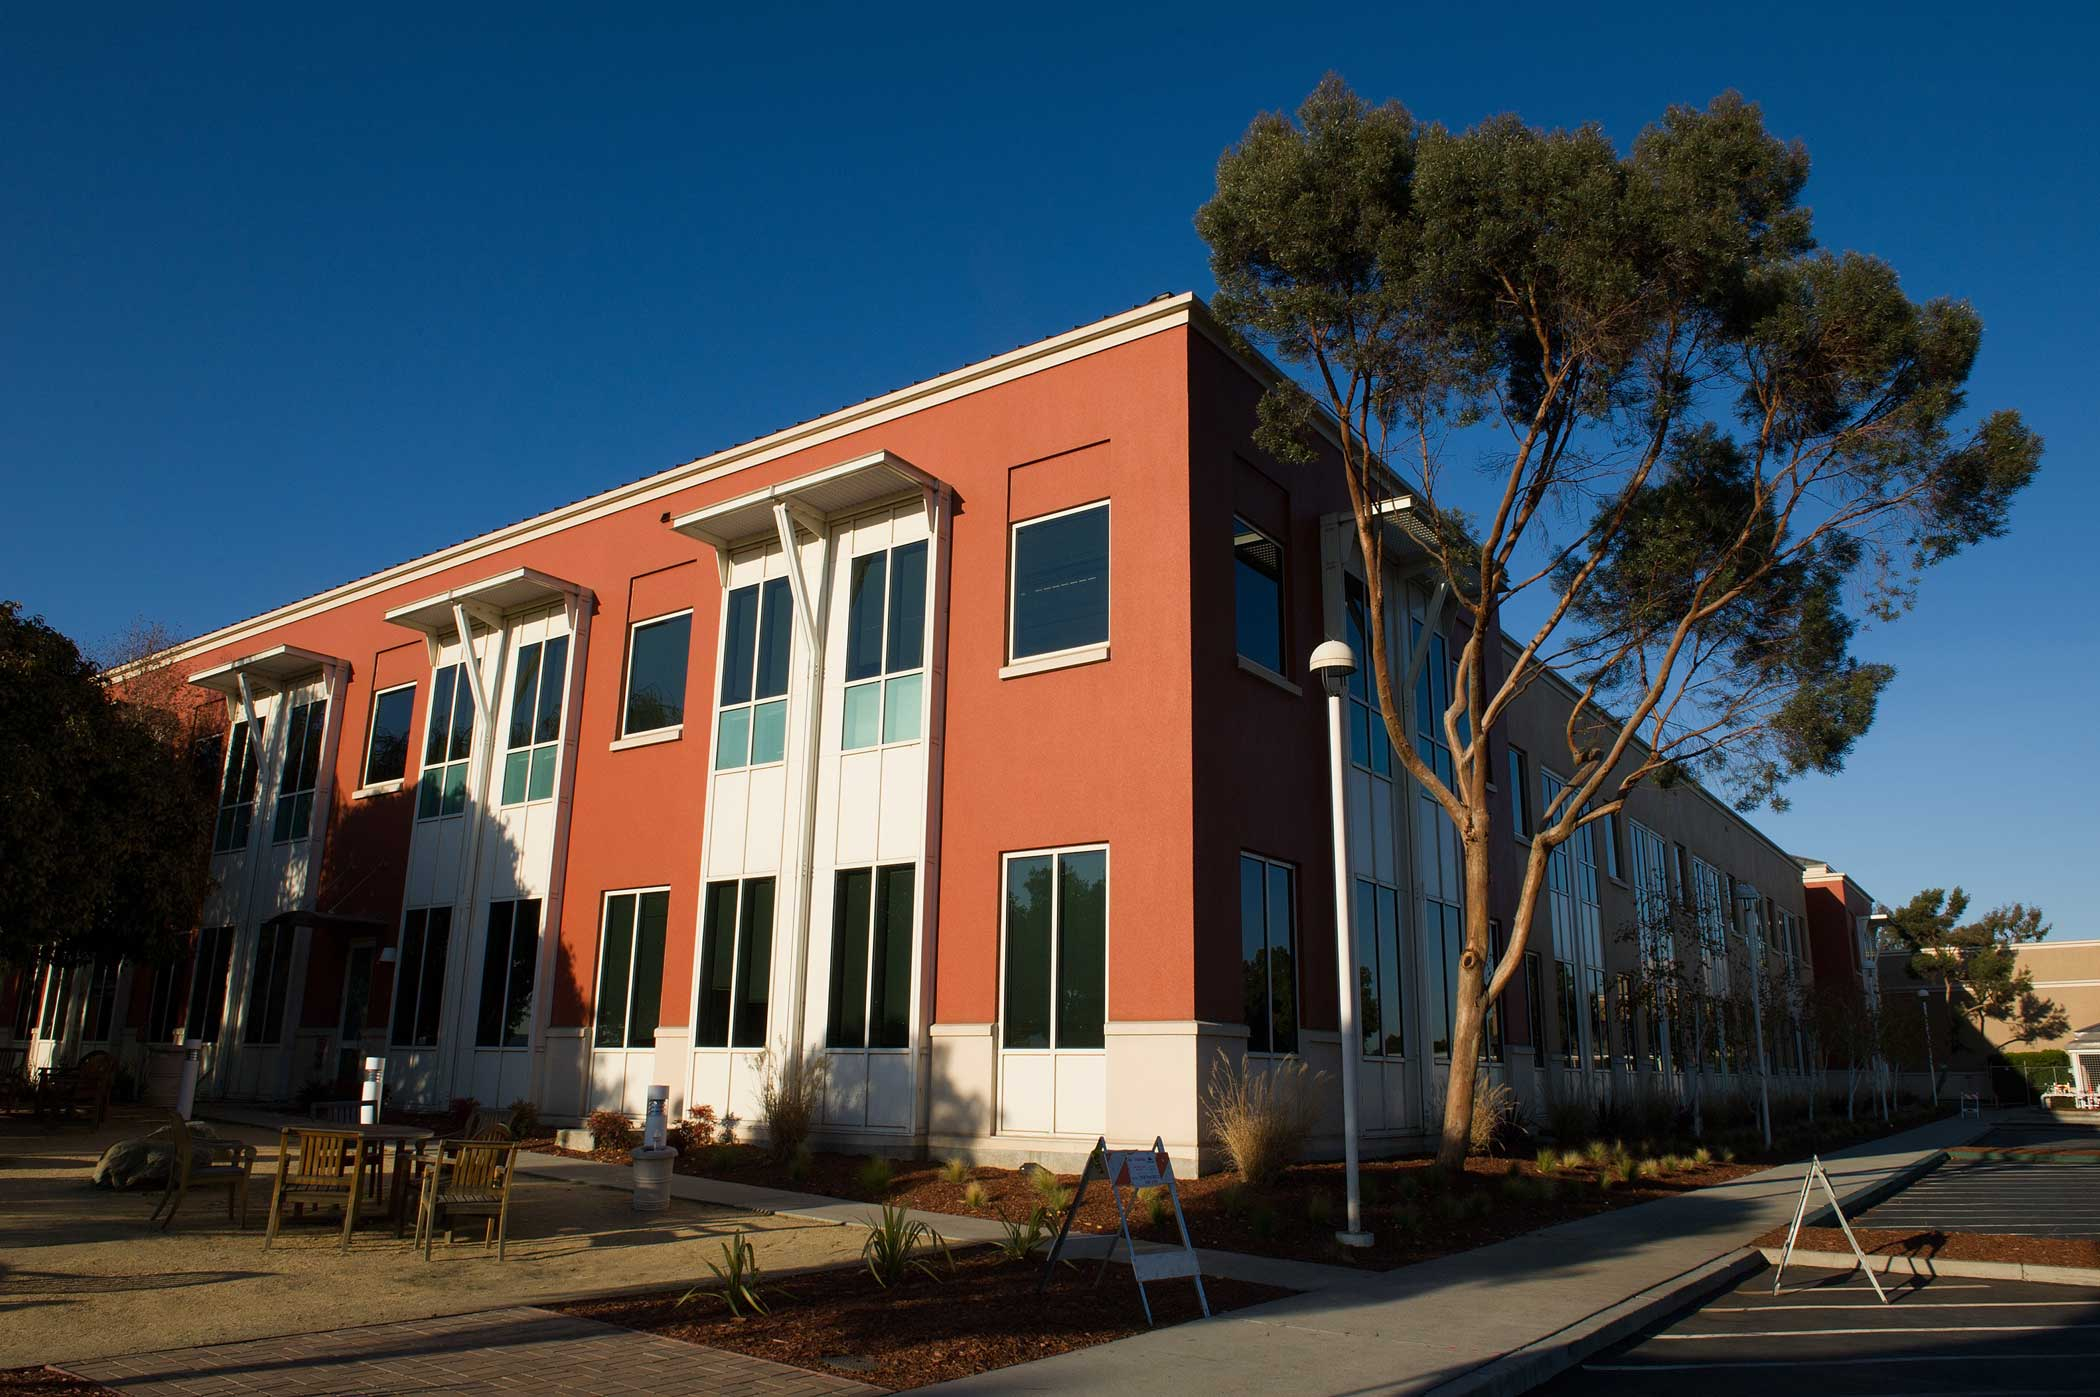 Buidling 10 stands on the Facebook Inc. campus in Menlo Park, California, U.S., on Dec. 2, 2011.